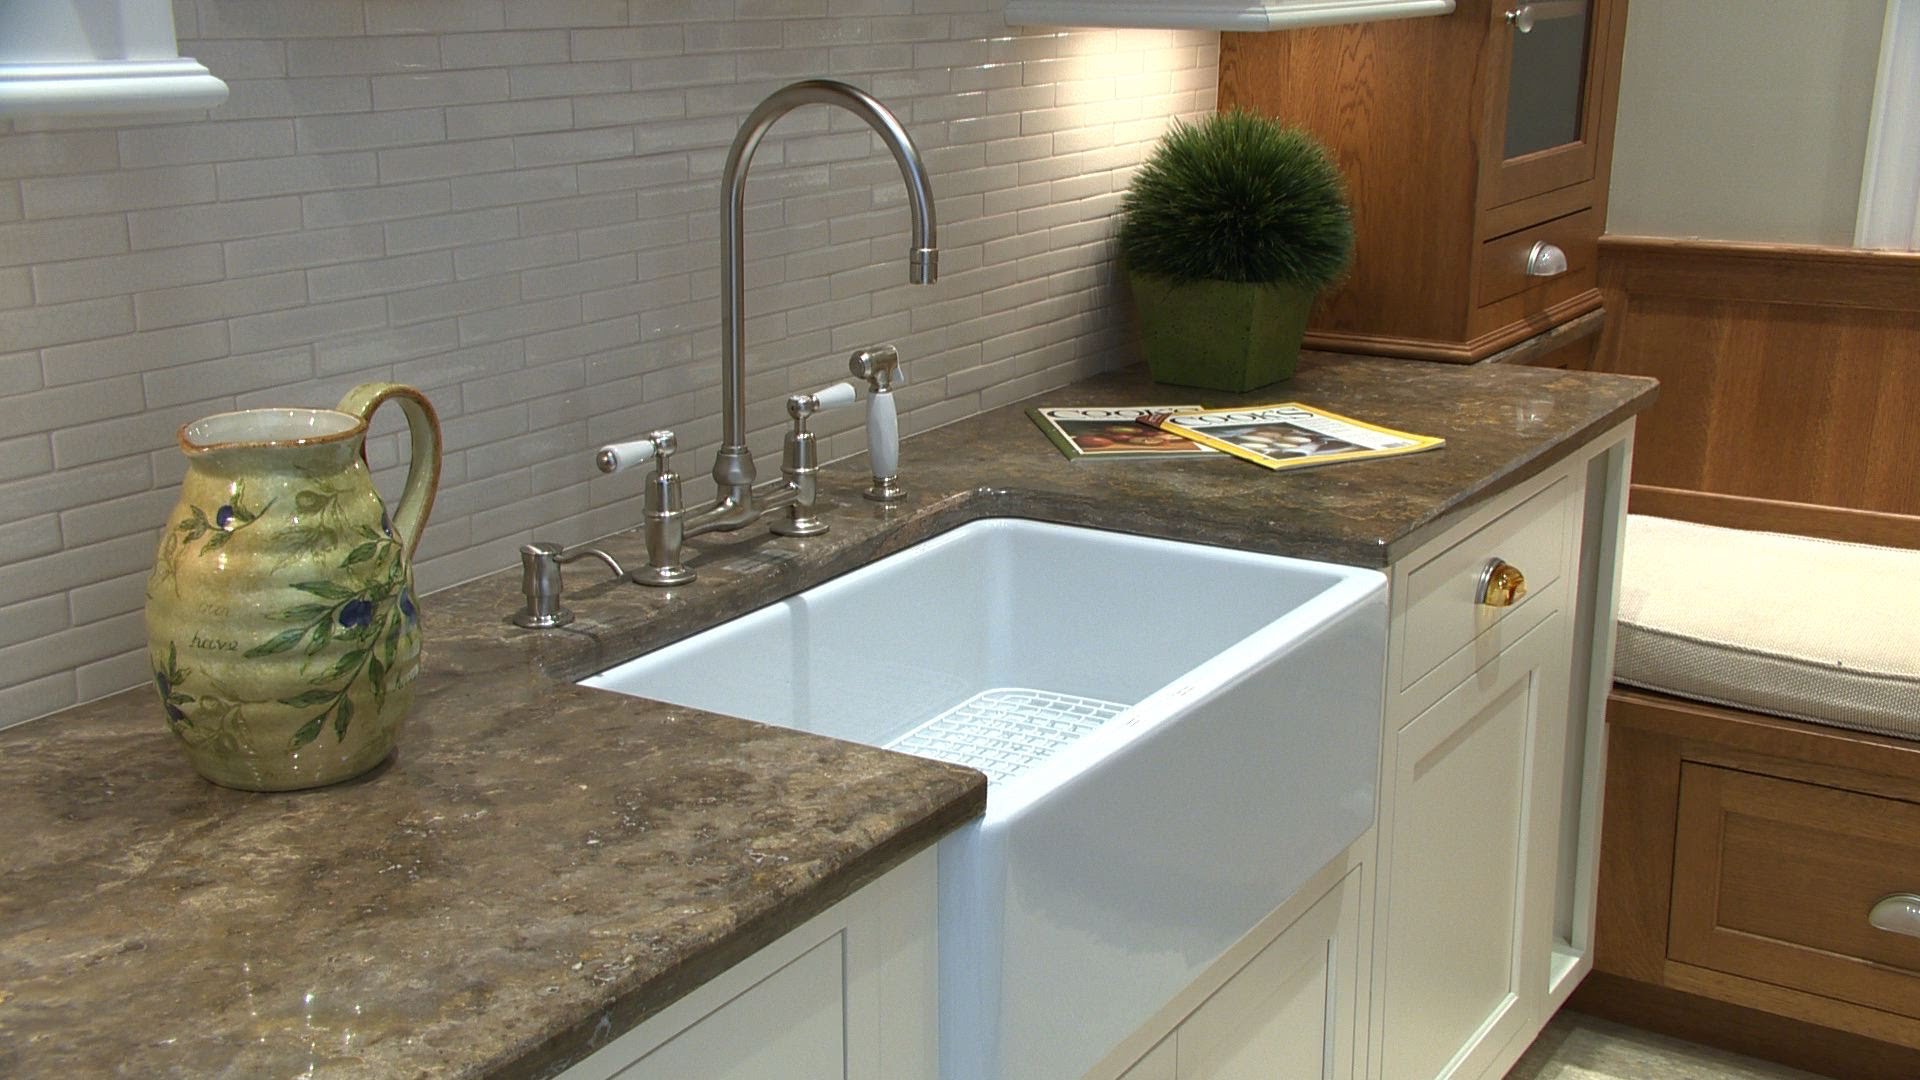 Odors Coming From Kitchen Sink Could Mean Trouble